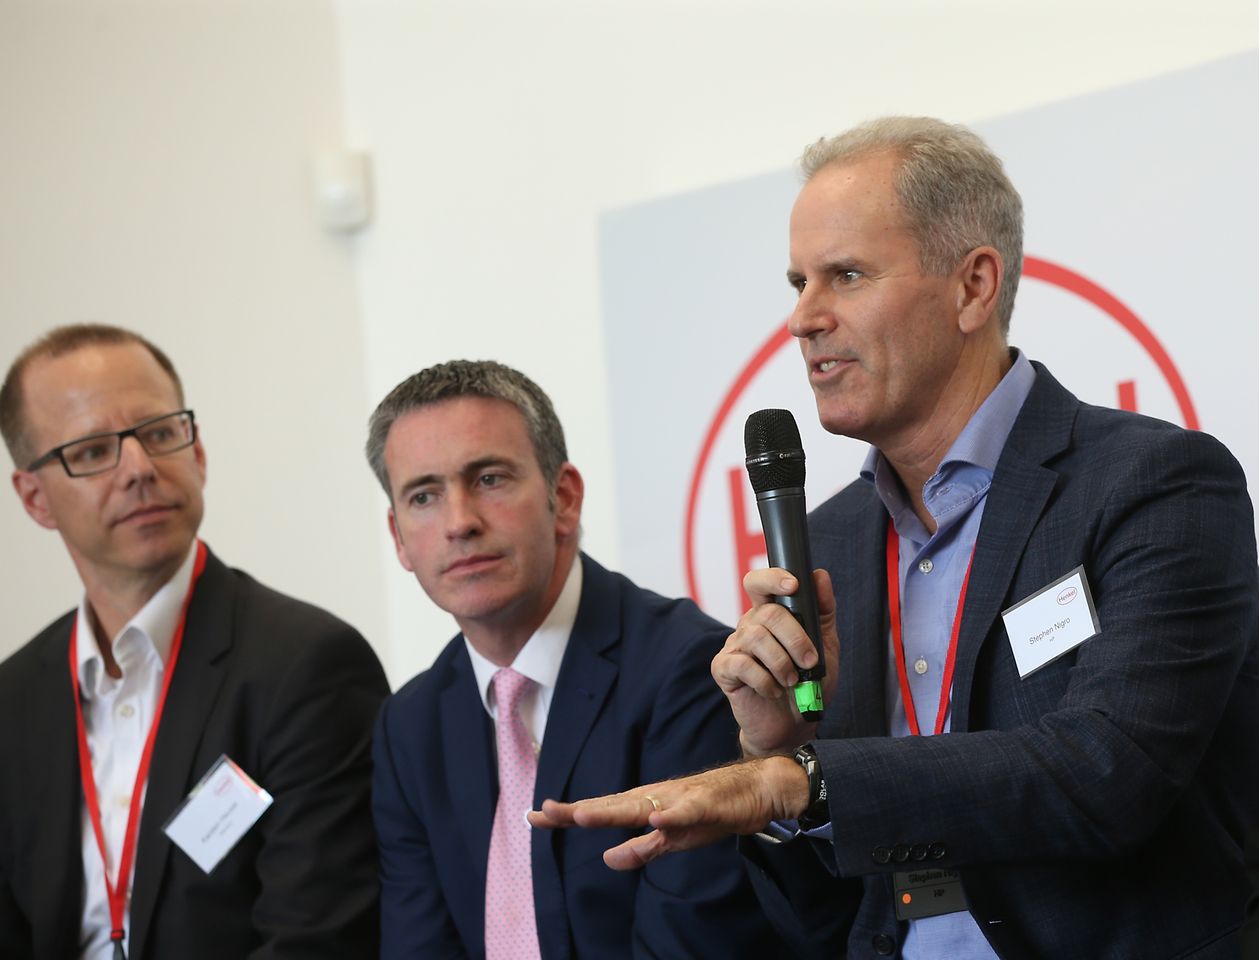 Stephen Nigro of HP during the panel discussion (to his right are Damien English, Government Minister, and Kersten Heuser of Siemens)